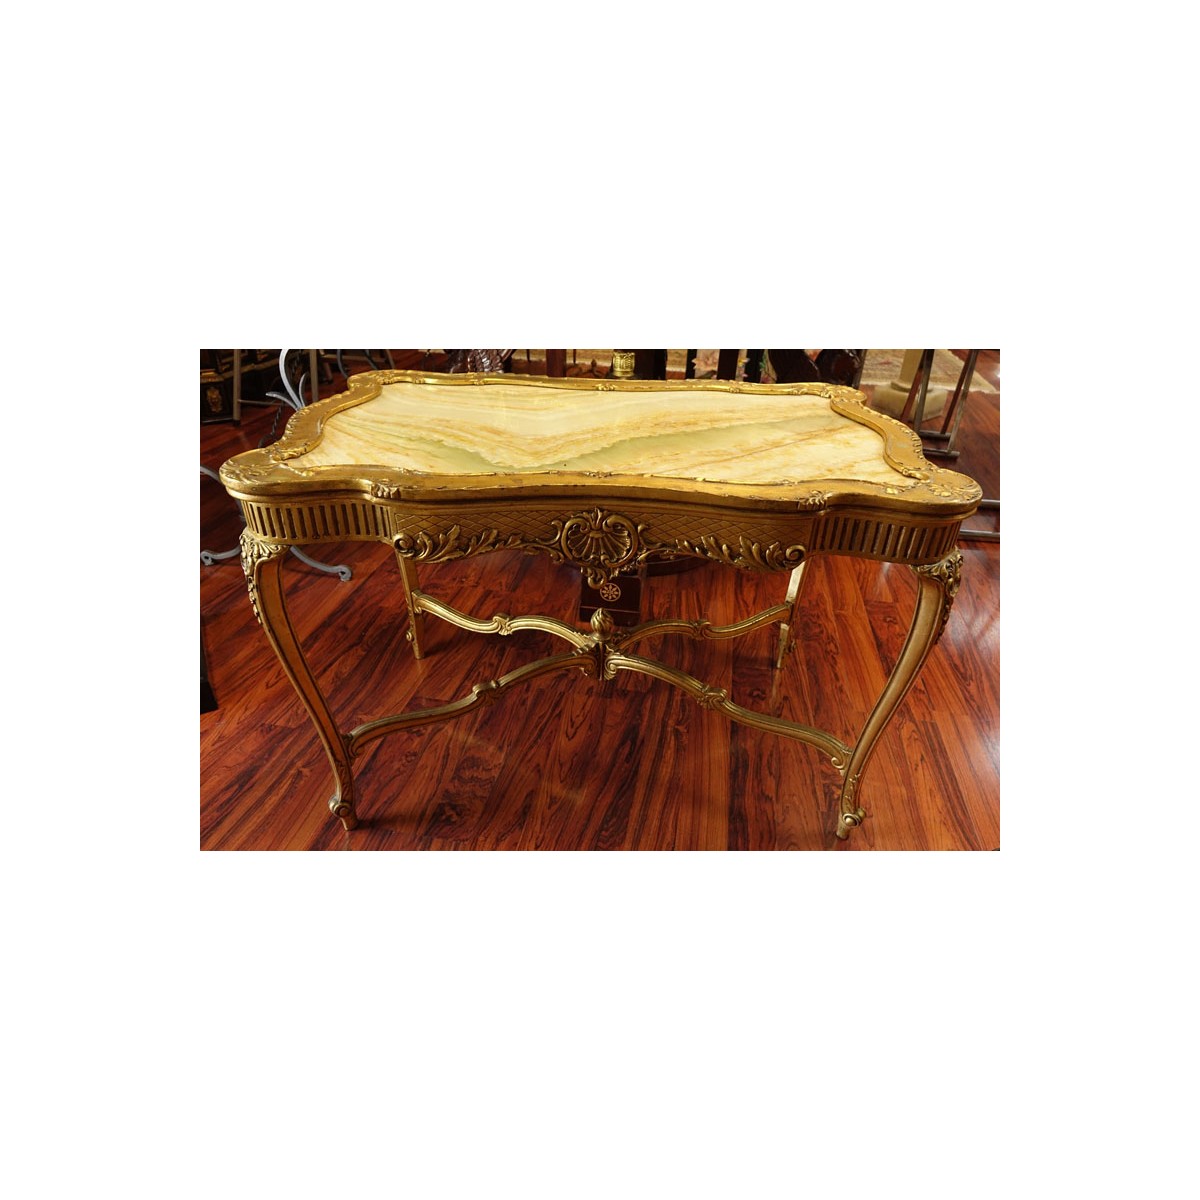 Early 20th Century Carved and Gilt Wood Center Table with Onyx Top. Decorated with carved scroll mo